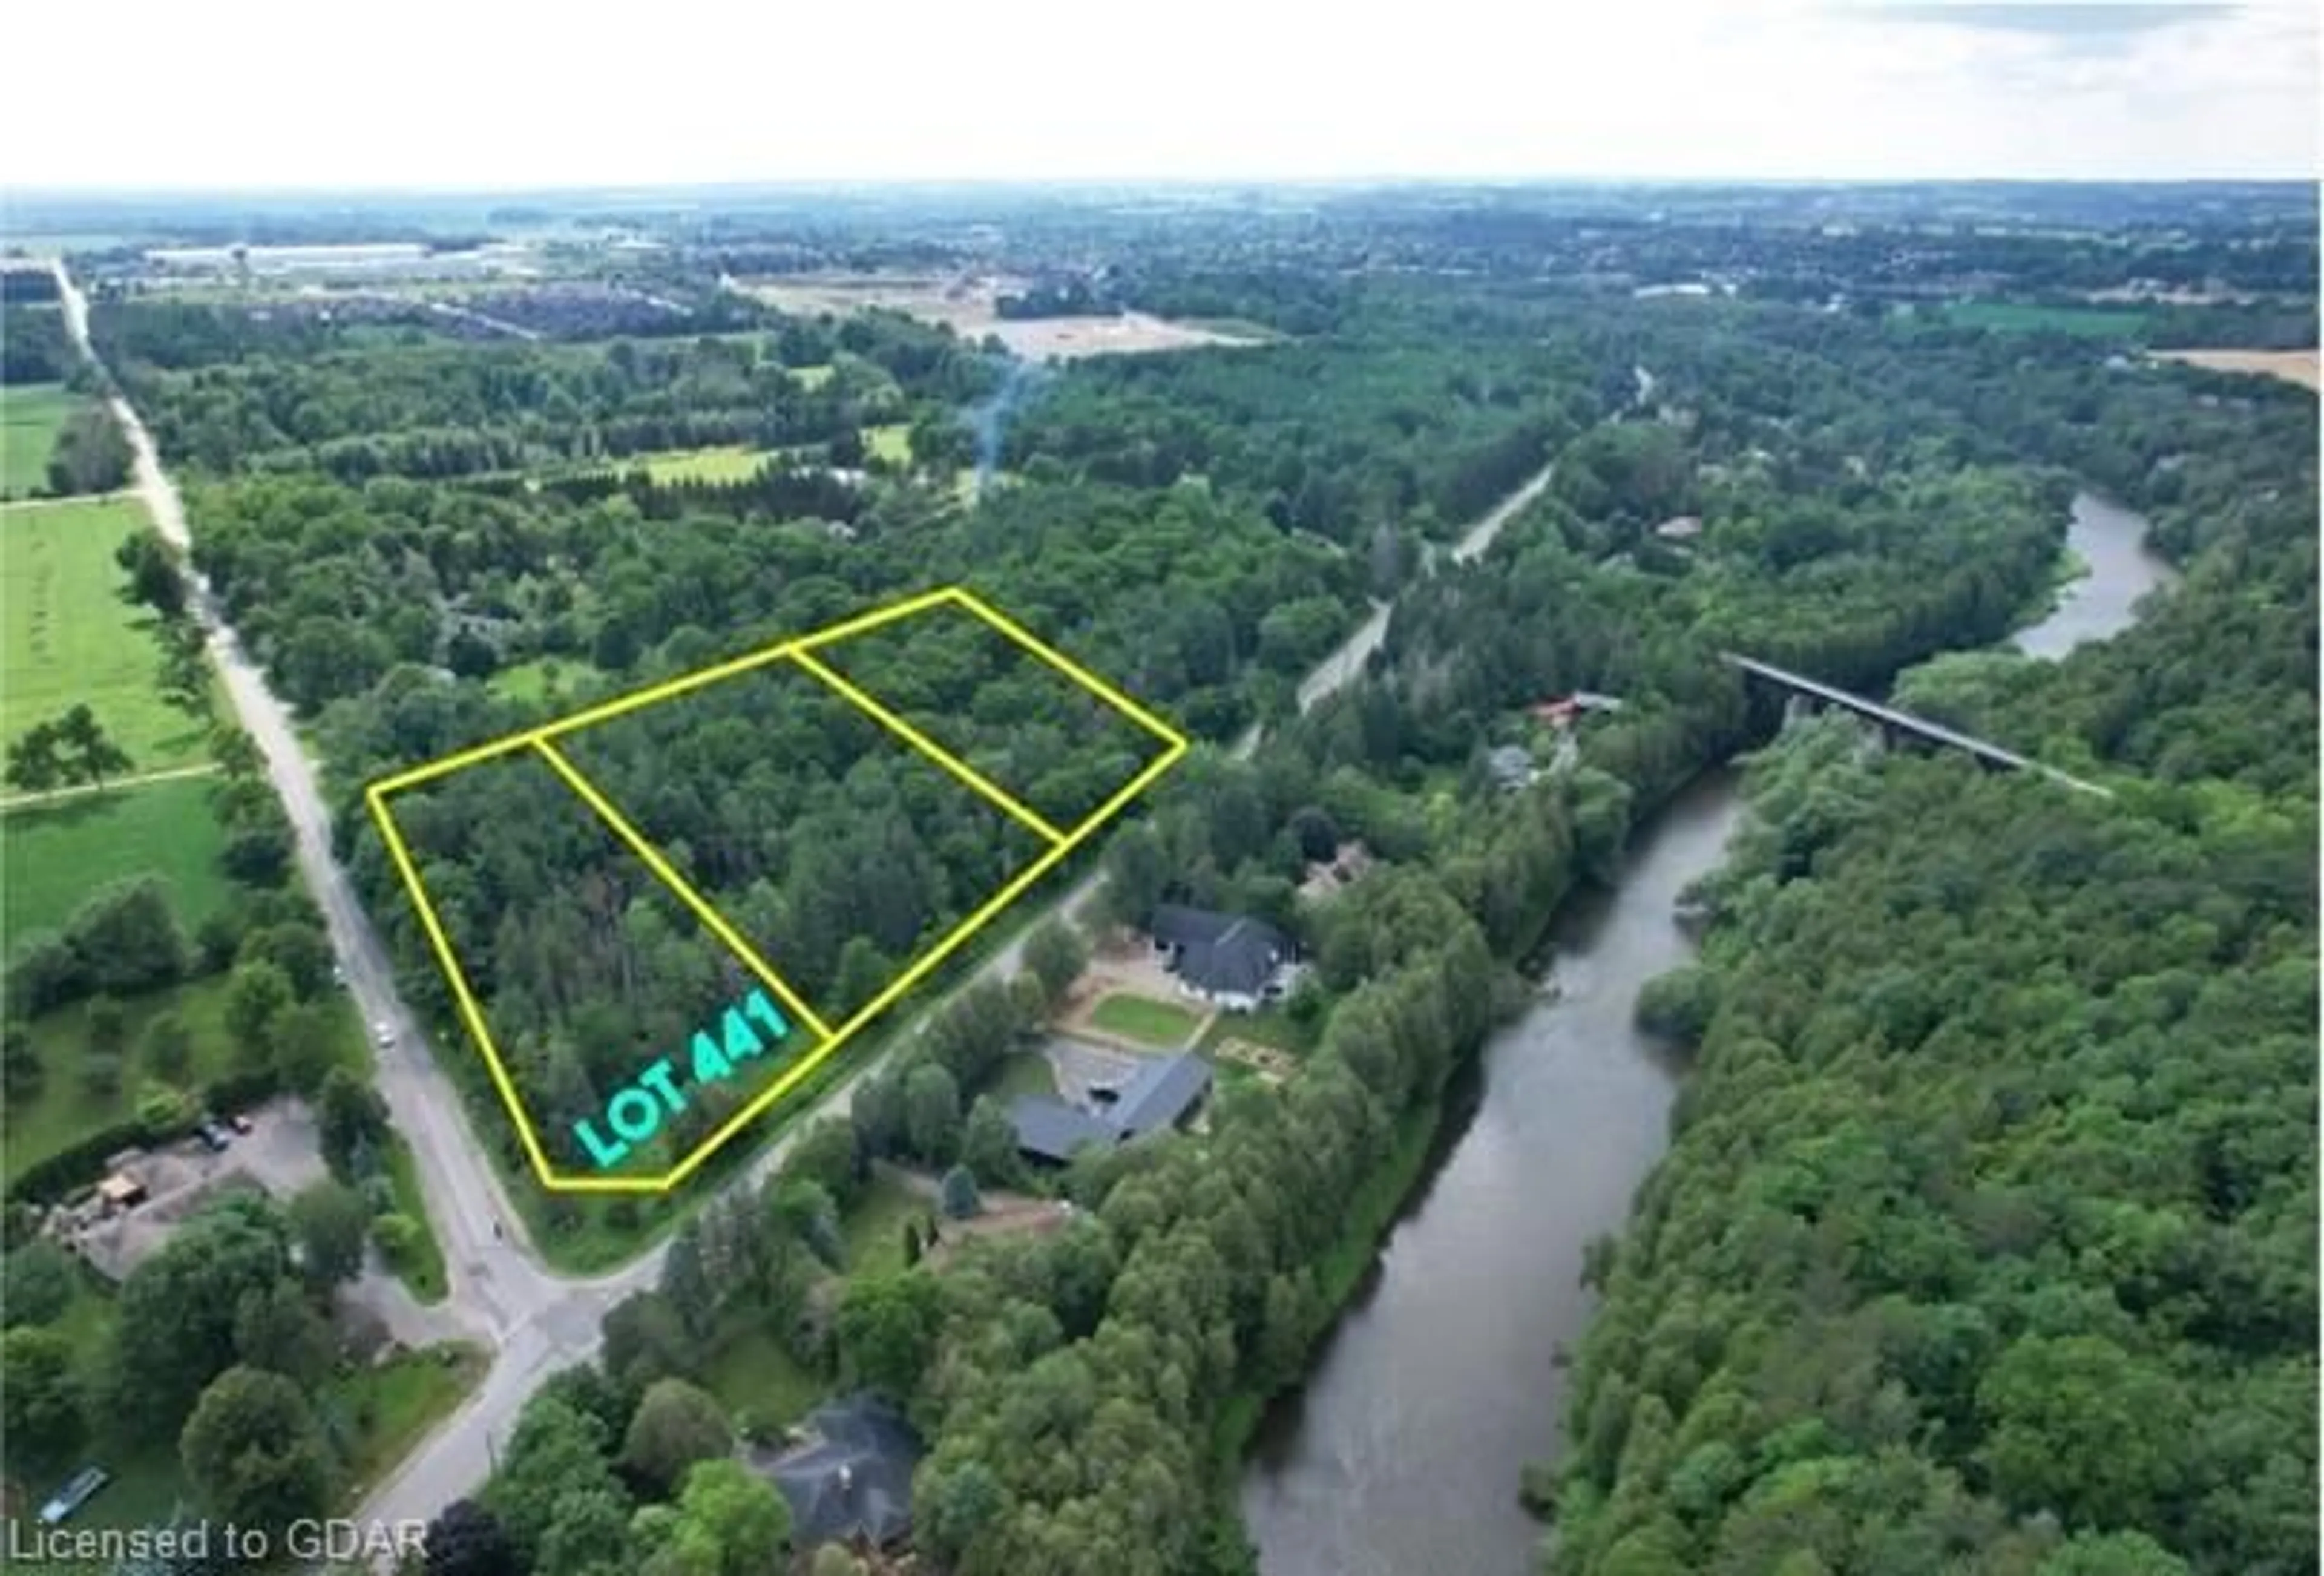 Lakeview for LOT 441 South River Rd, Elora Ontario N0B 1S0